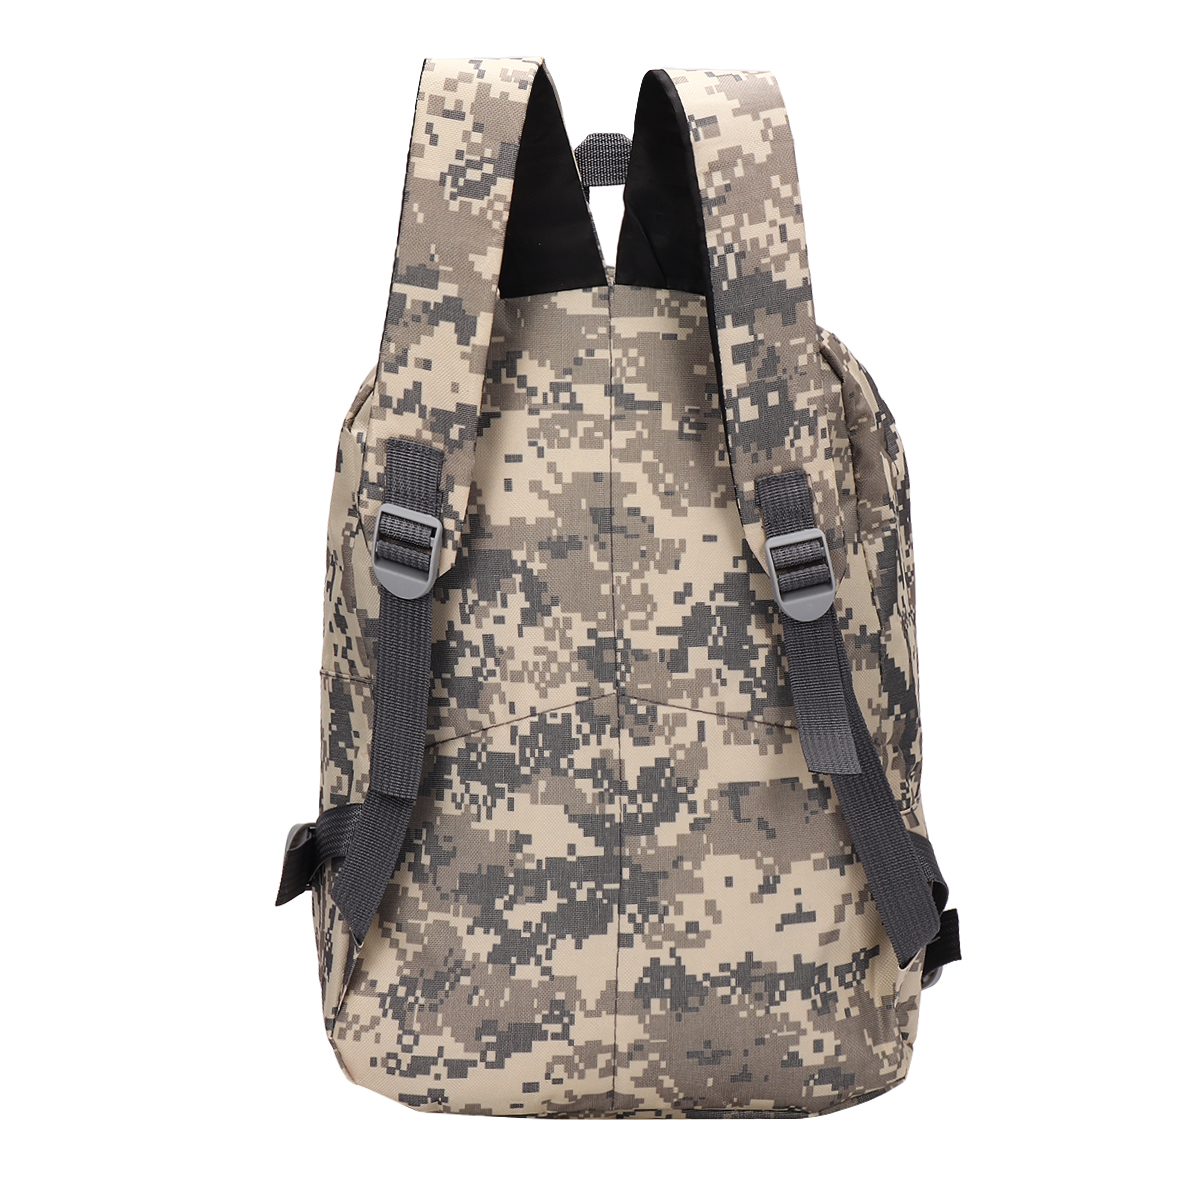 Camouflage-Large-Capacity-Oxford-Cloth-Macbook-Mobile-Phone-Storage-Bag-Backpack-1860030-5